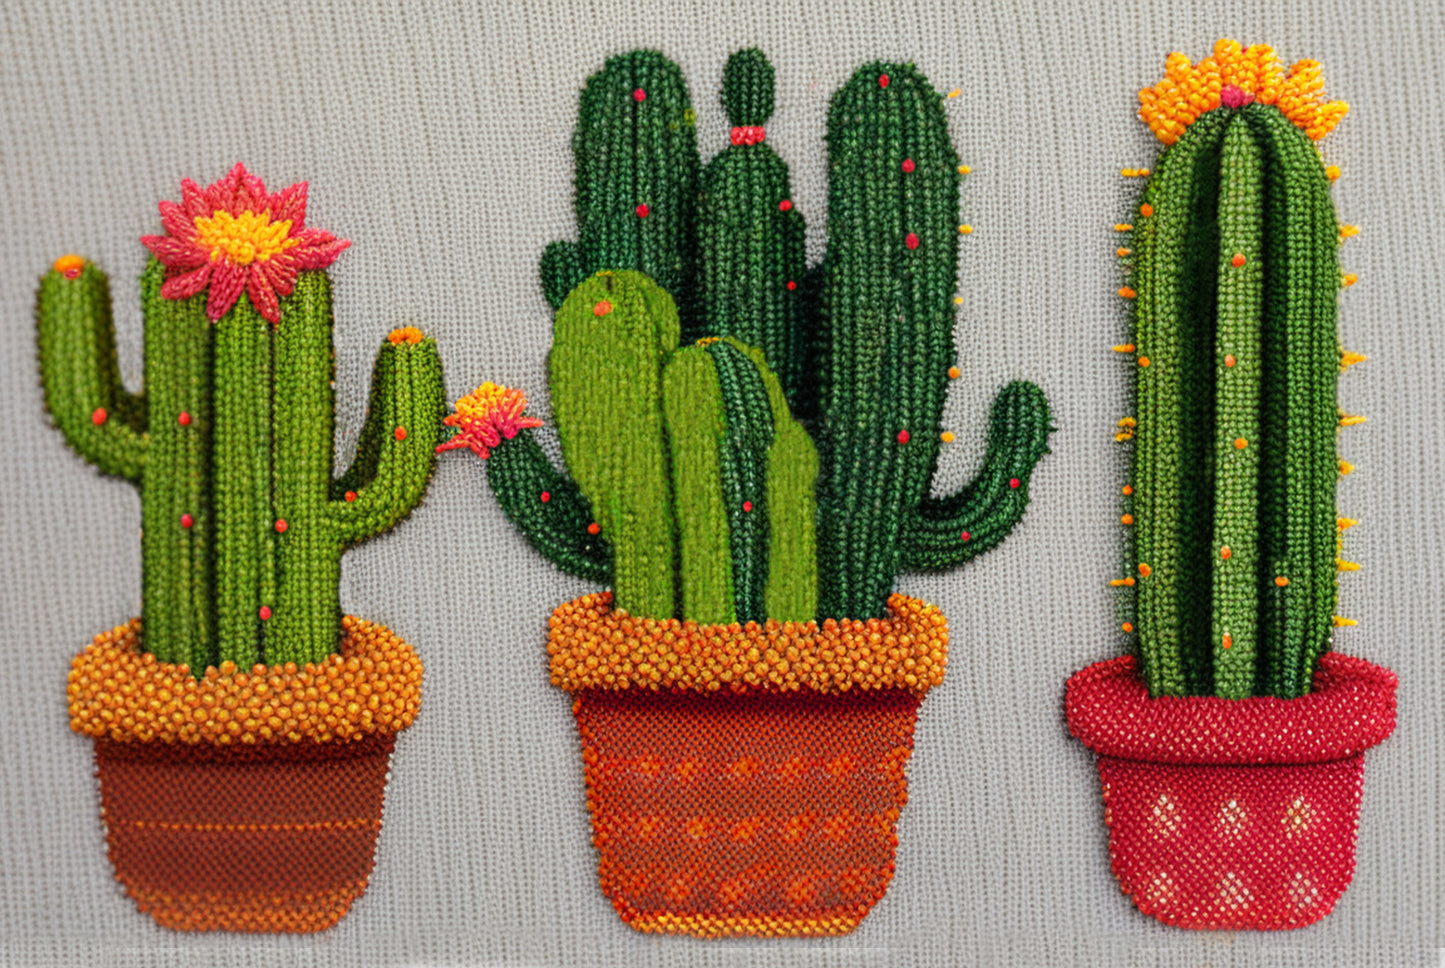 Three cactus latch hook kits for adults, size 23.6''X15.8''/60X40 CM